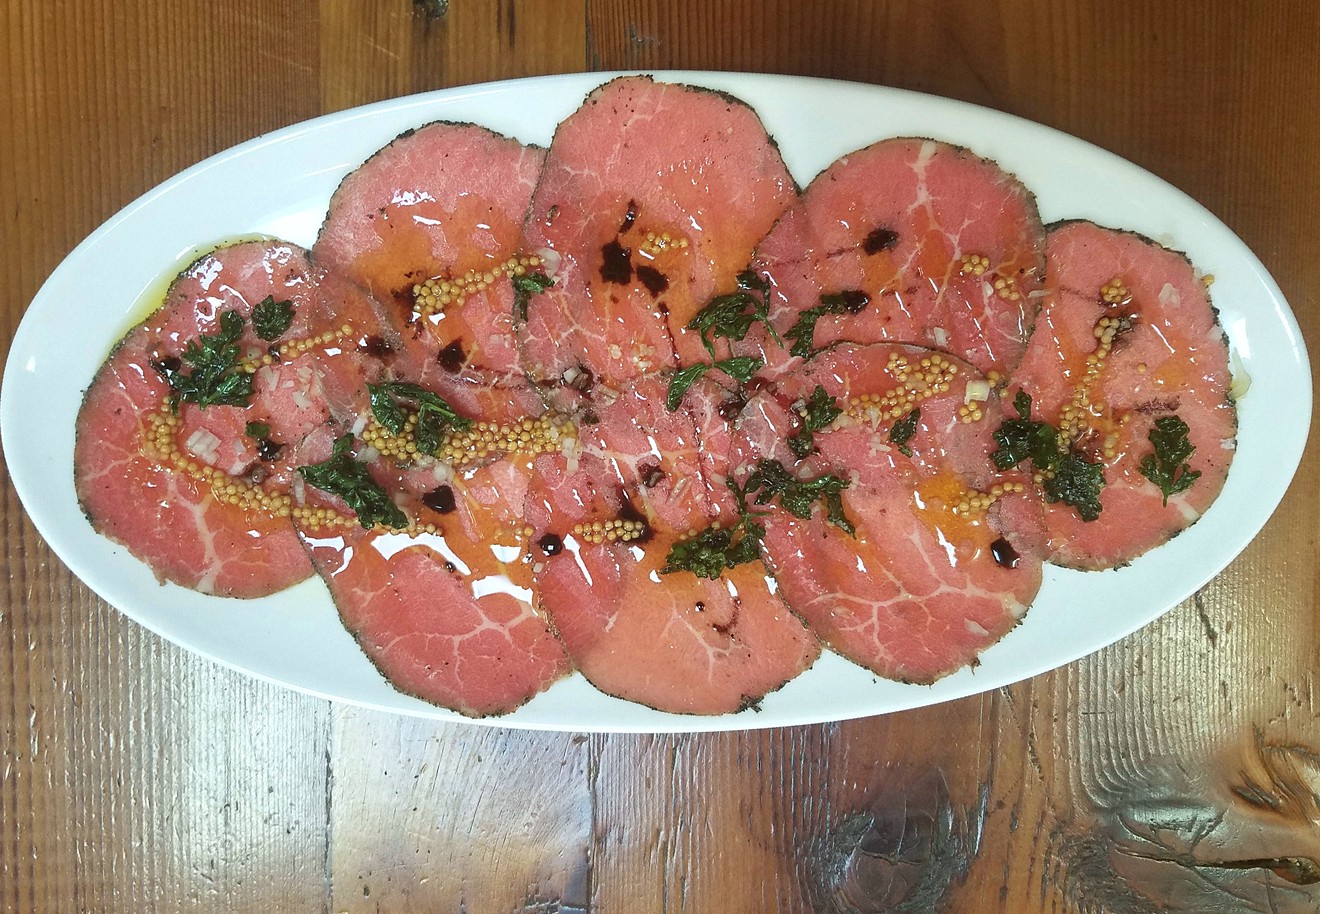 The wagyu carpaccio at Old Major is a must-have for dinner.